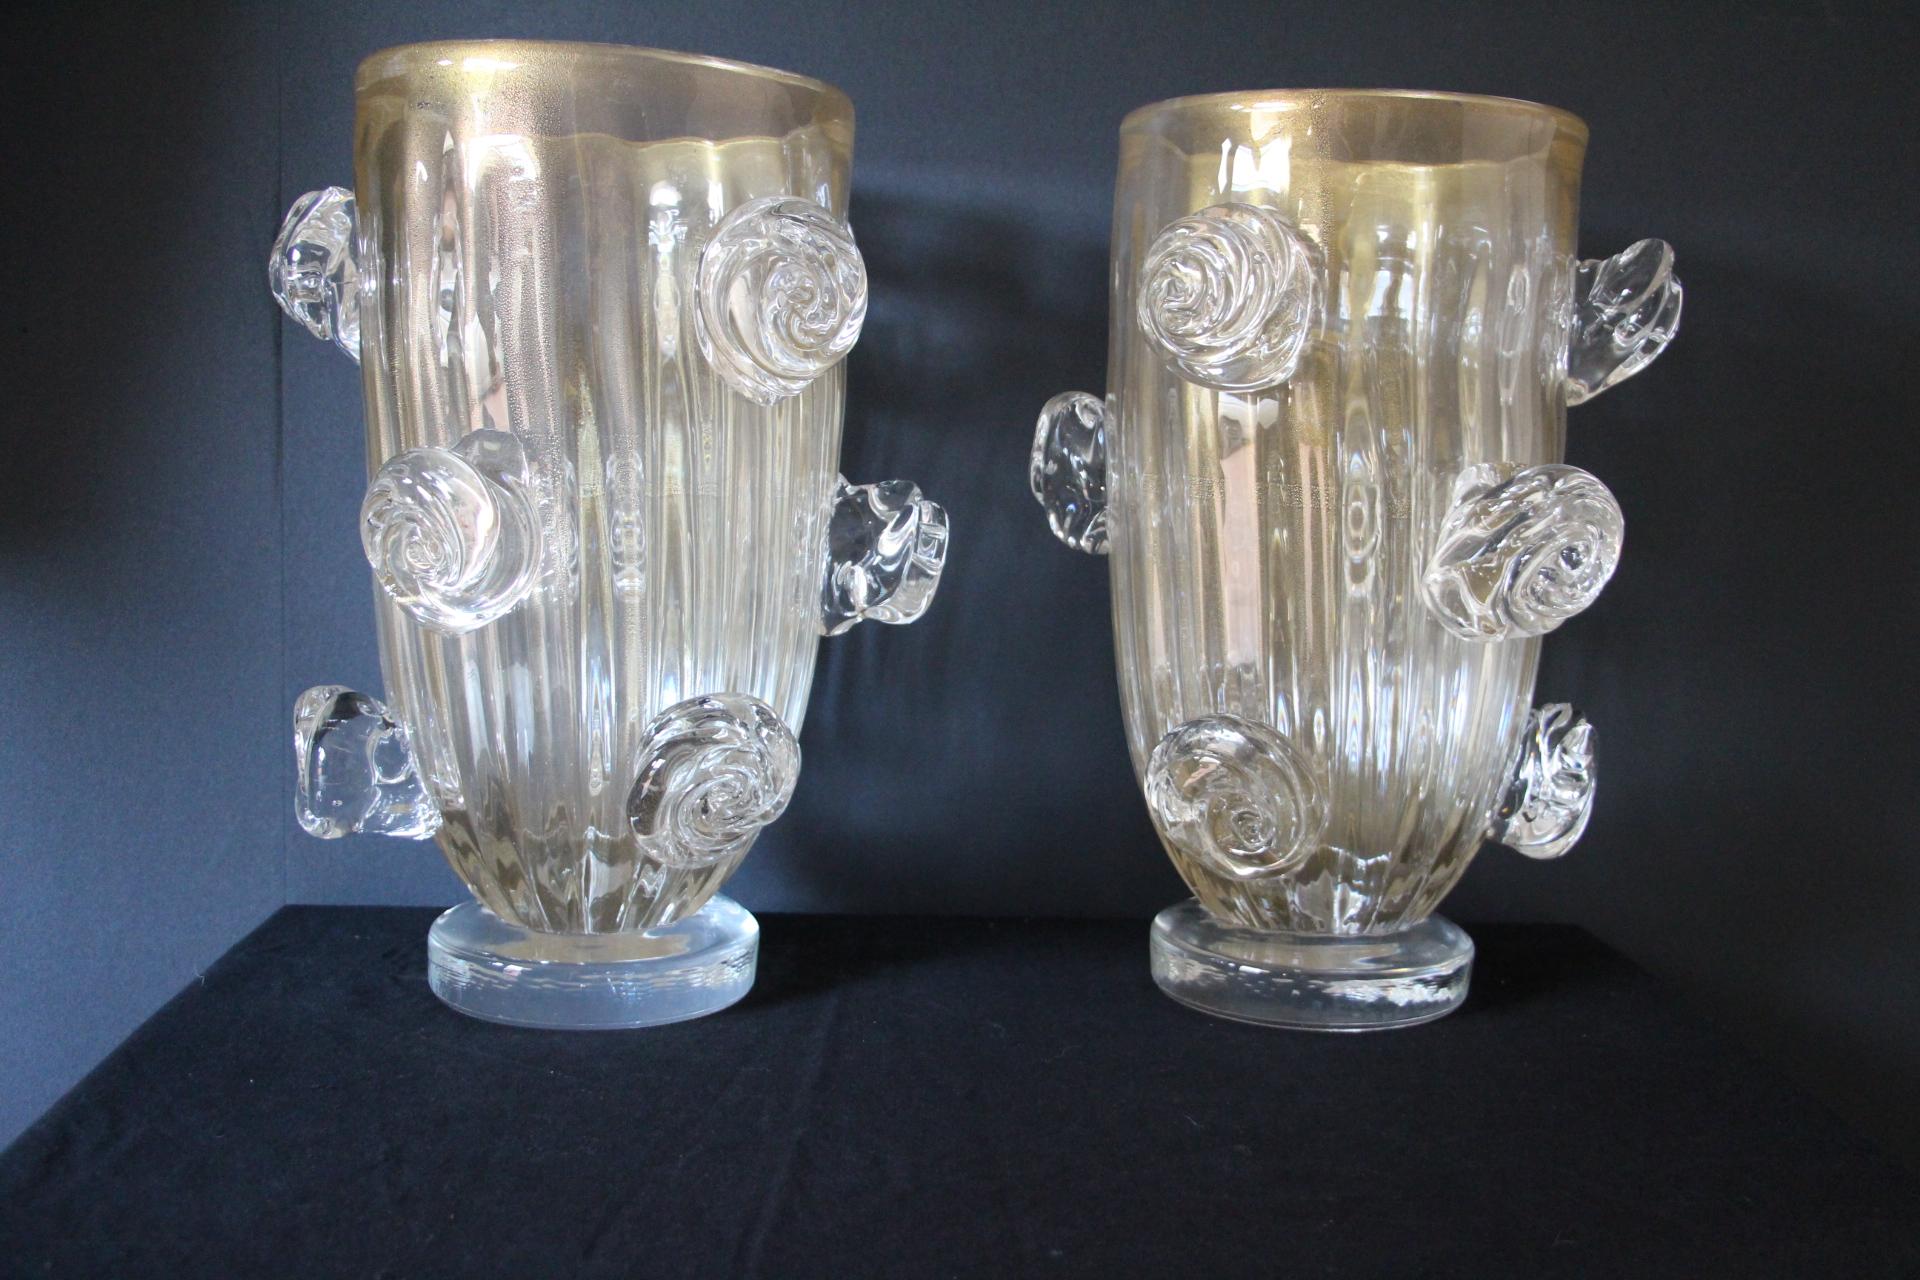 Pair of Large Golden Murano Glass Vases With Roses Decor by Costantini In Excellent Condition For Sale In Saint-Ouen, FR